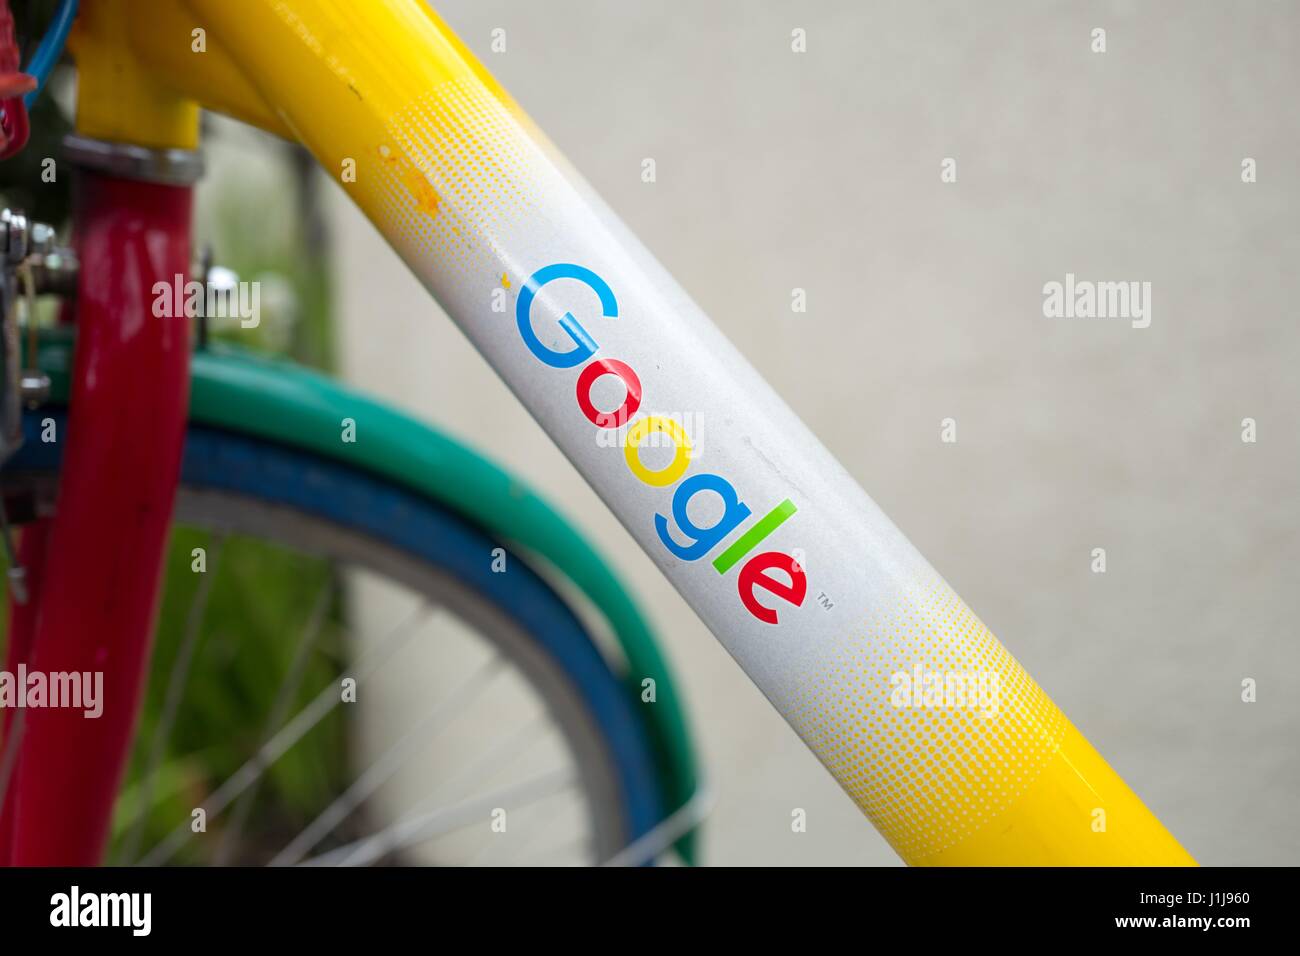 Logo for Google Inc on a frame of a Google Bike, near the Googleplex, the Silicon Valley headquarters of search engine and technology company Google Inc, Mountain View, California, April 7, 2017. Stock Photo